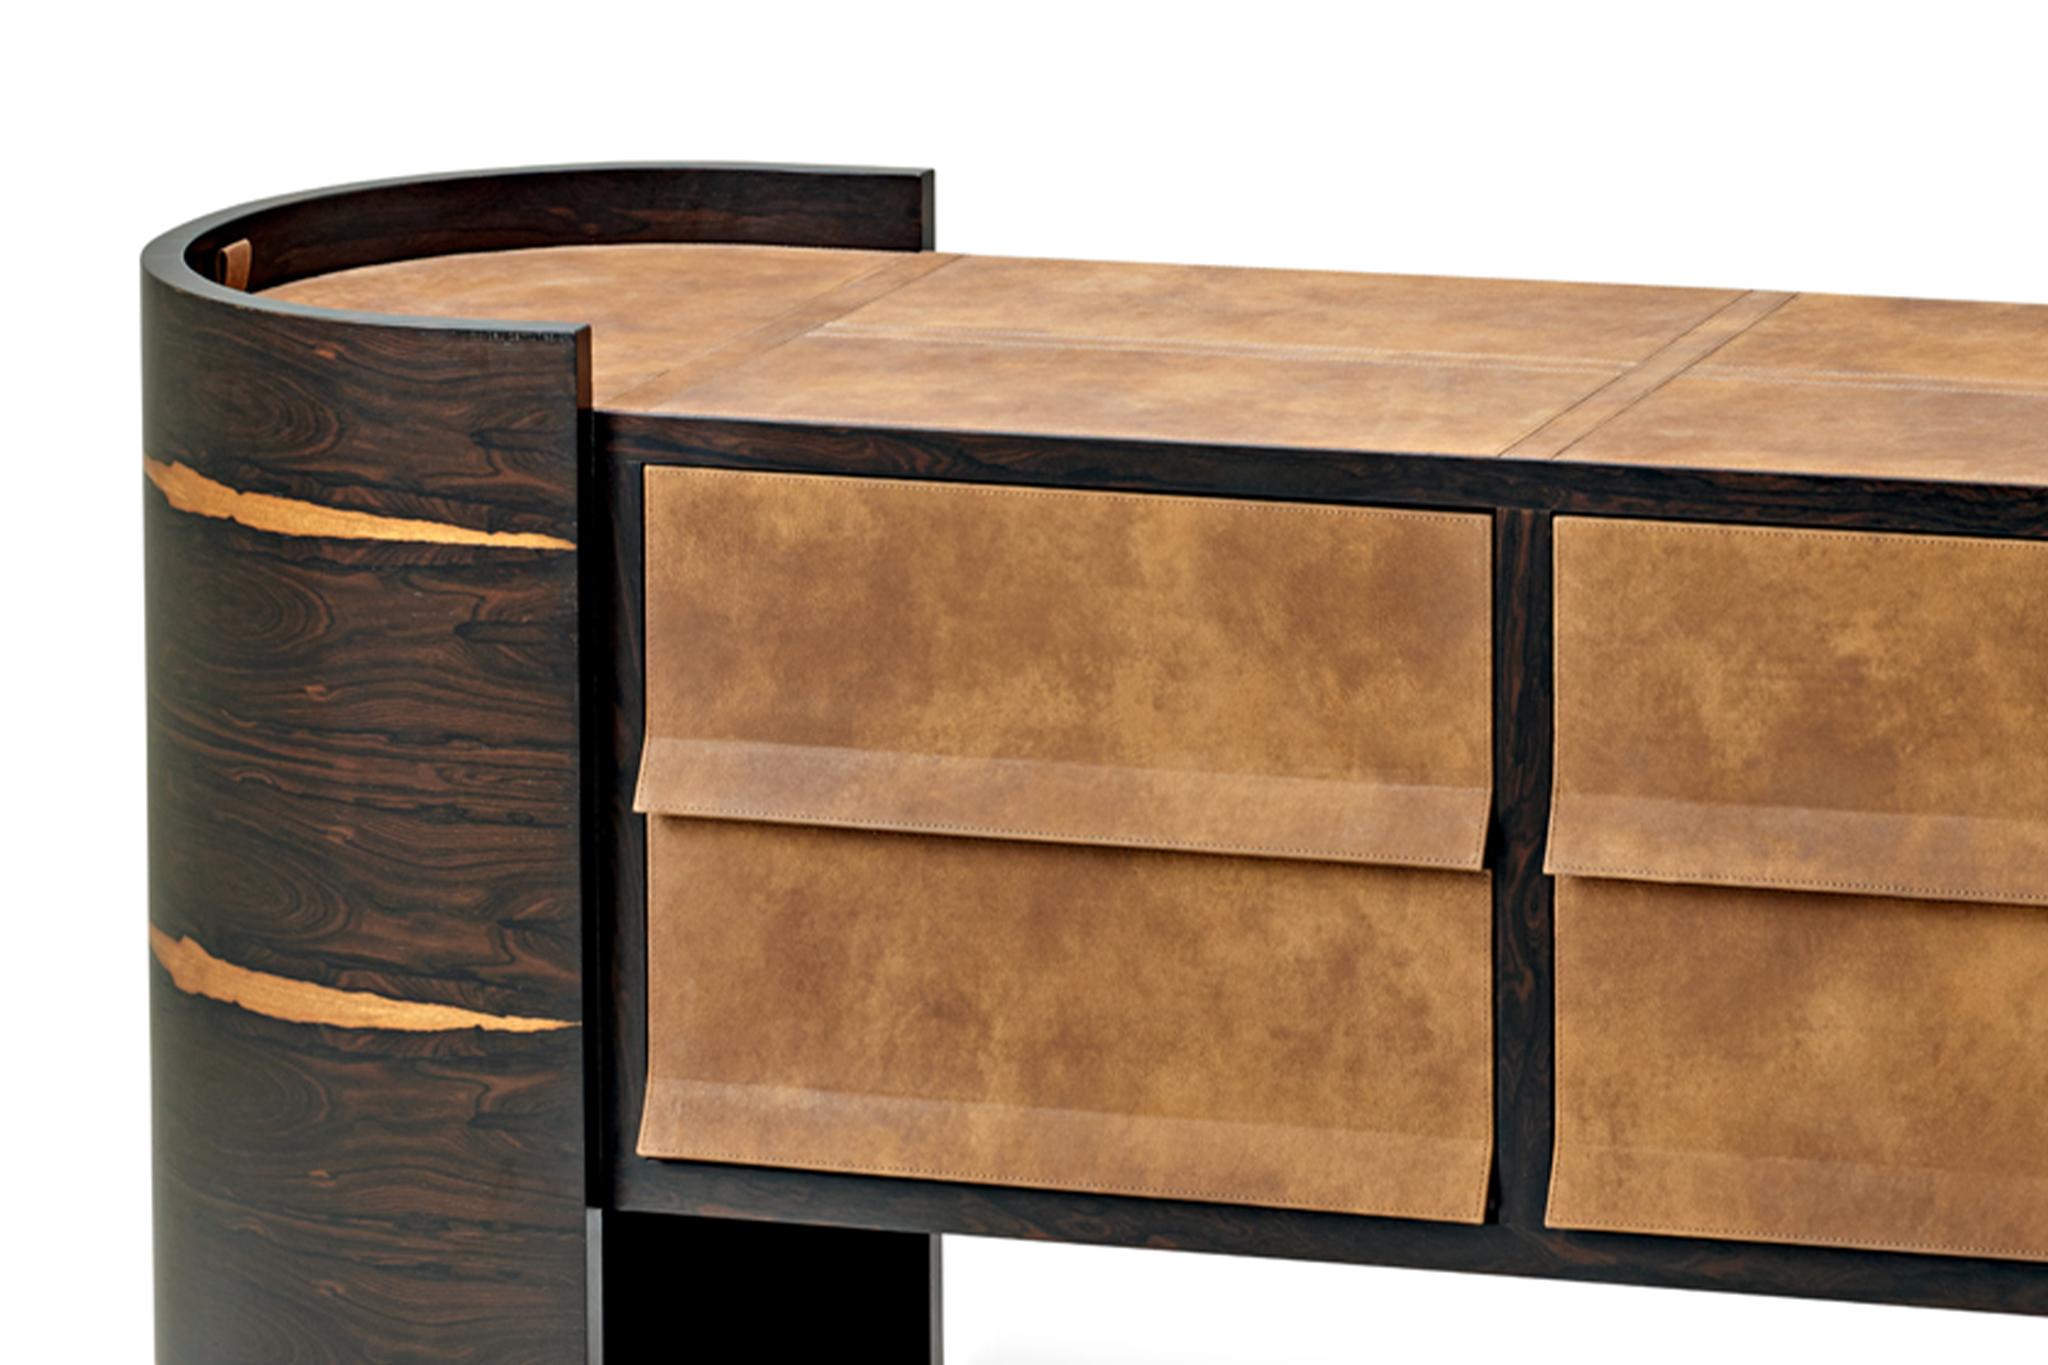 Cais Sideboard, Ziricote Wood Veneer, Leather Details In New Condition For Sale In Fiscal Amares, PT